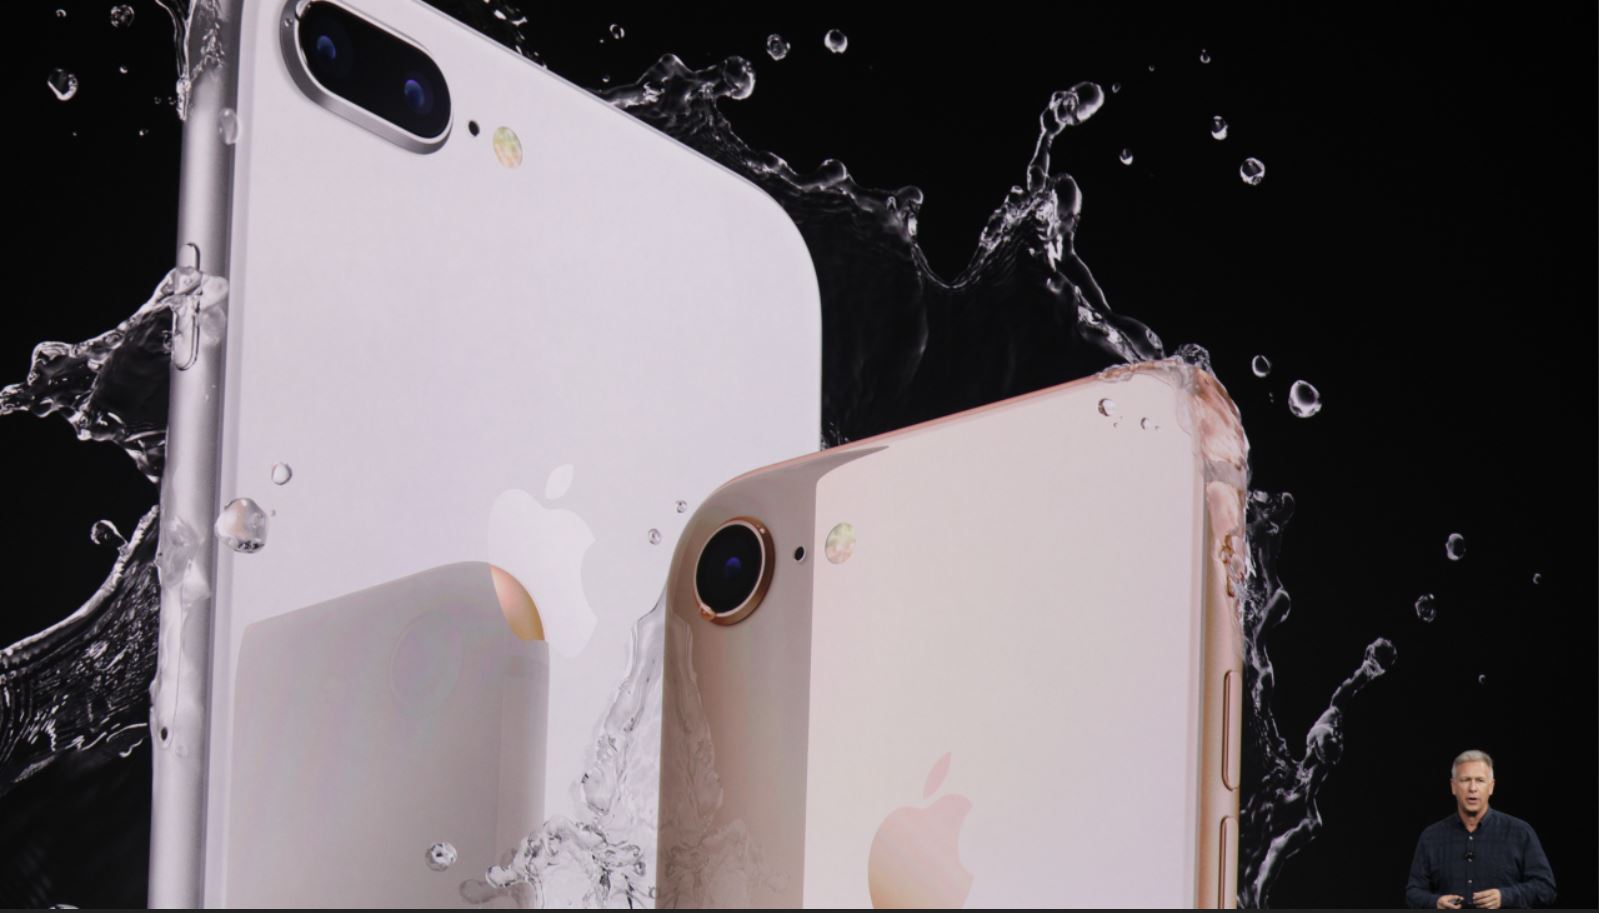 iphone 8 and iphone 8 plus launched - techfoogle